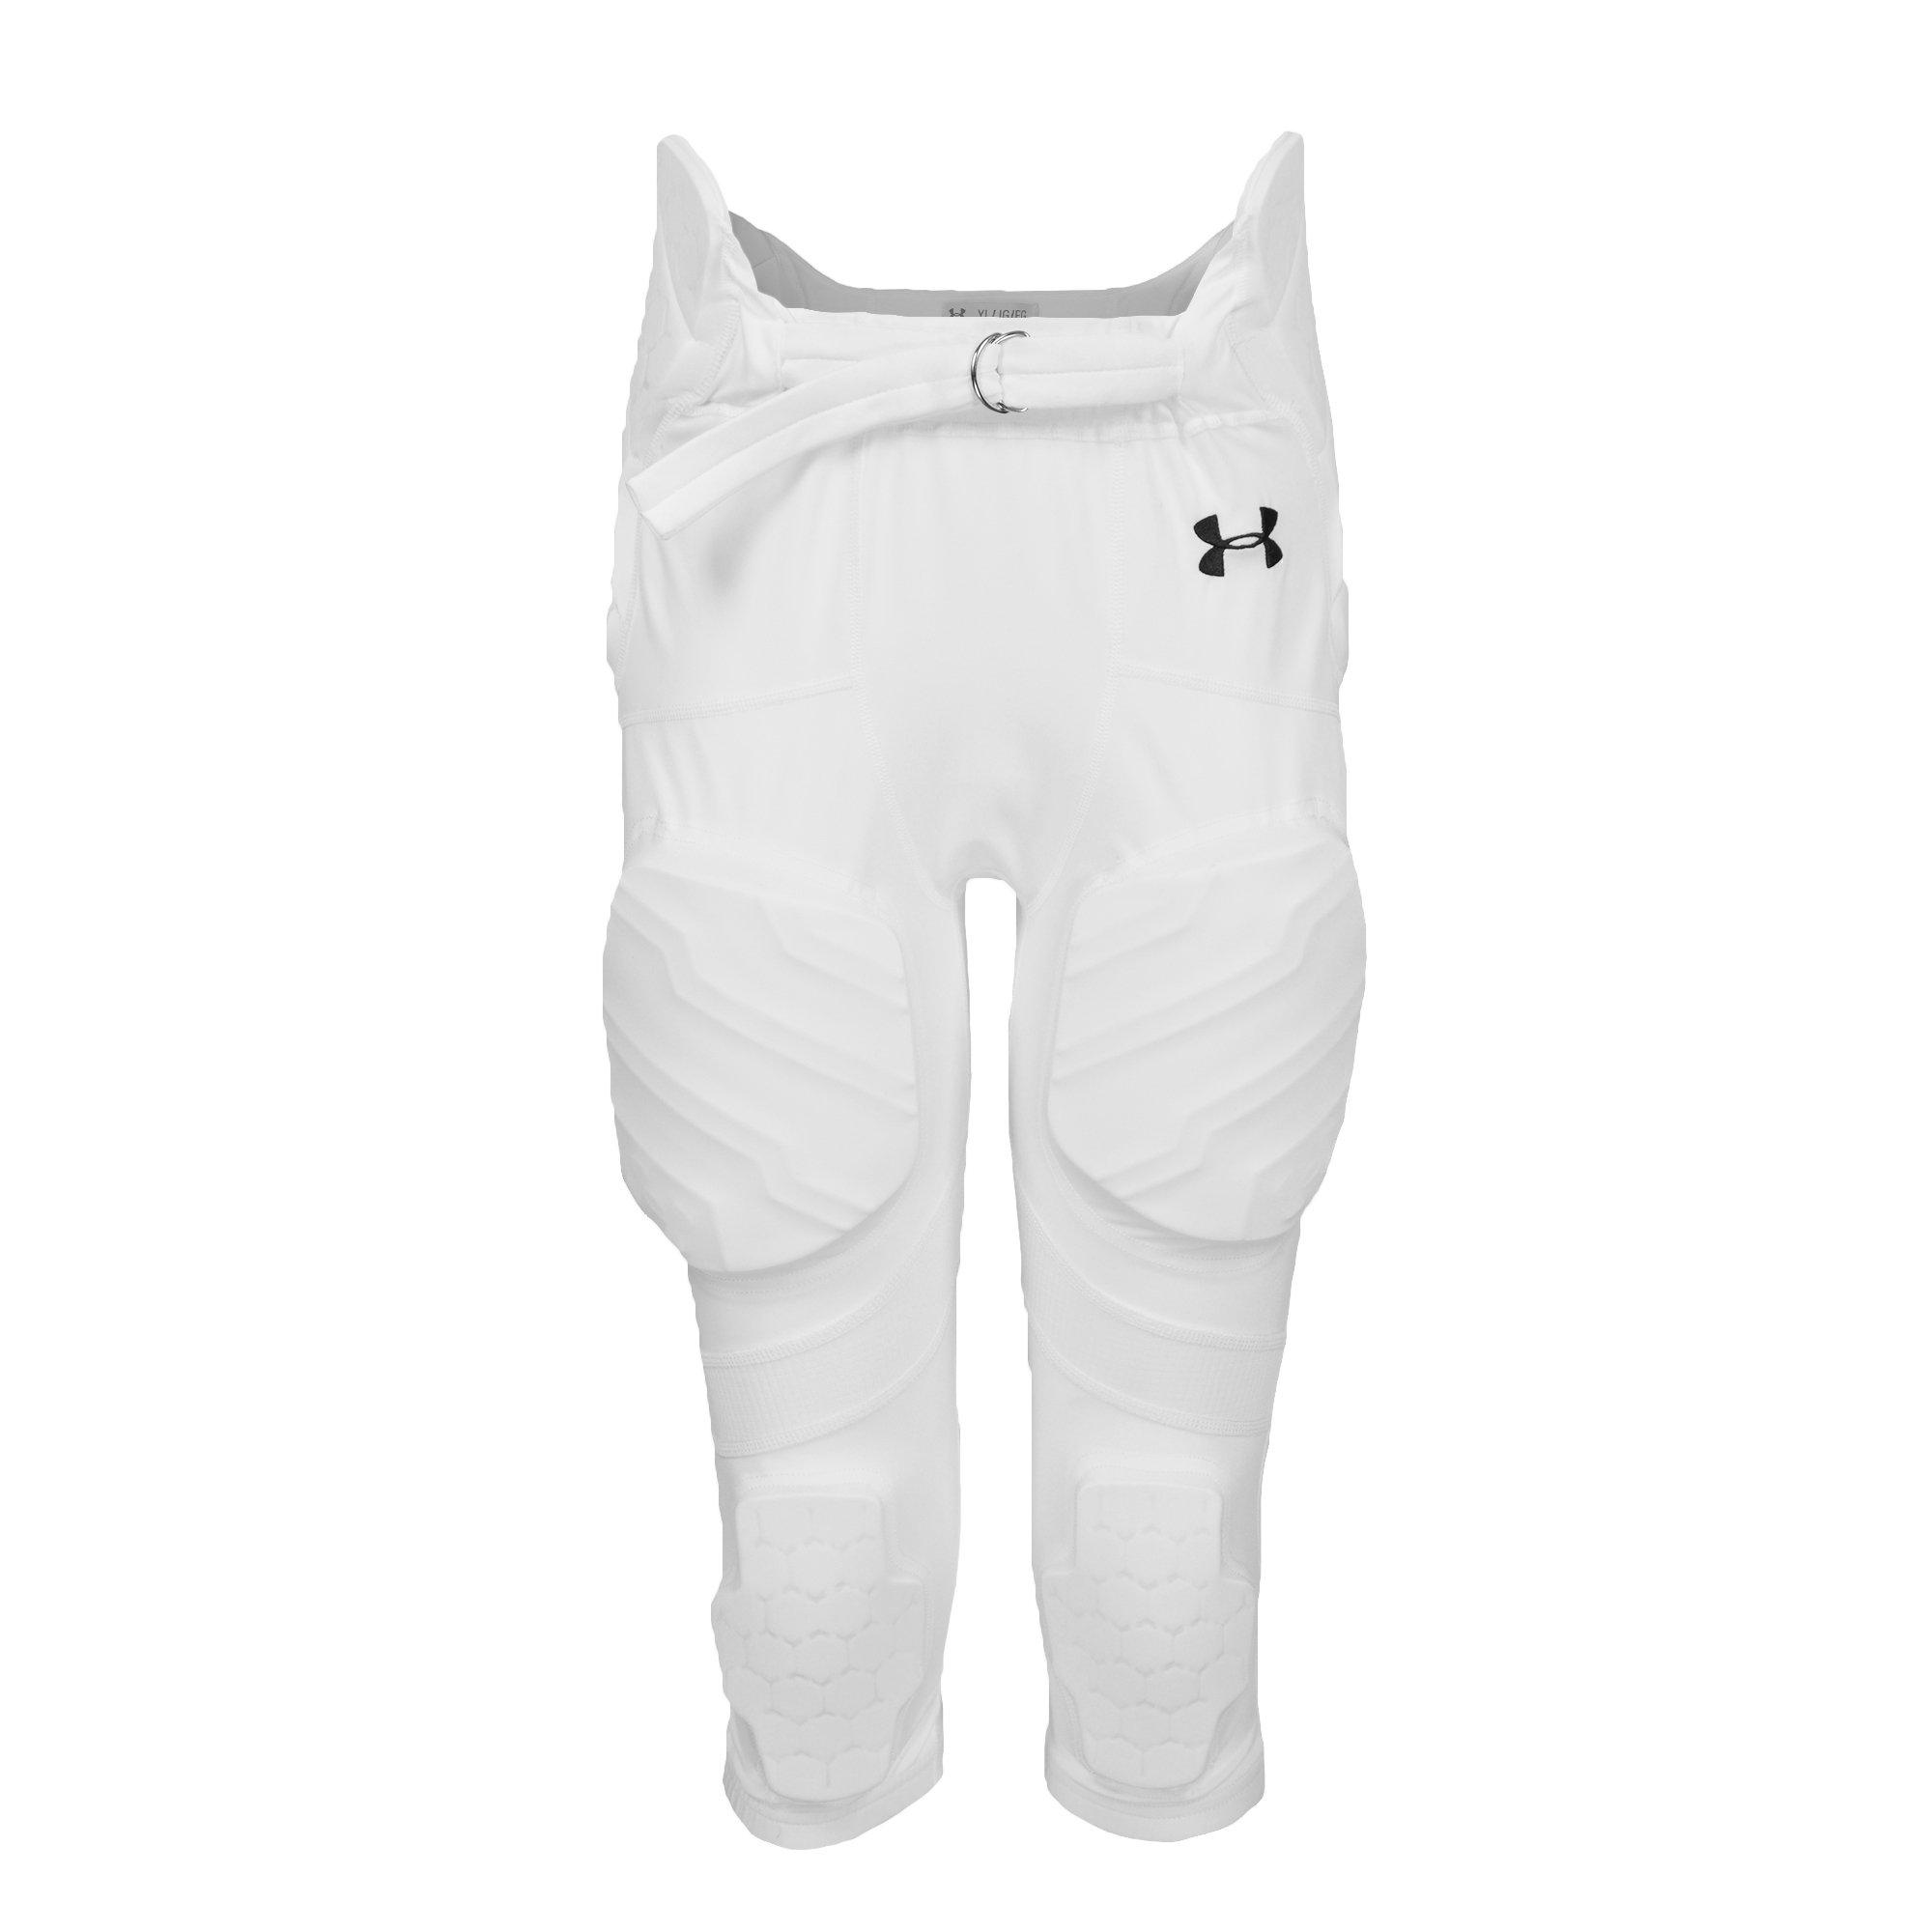 Youth Large Padded Football Pants - Apparel